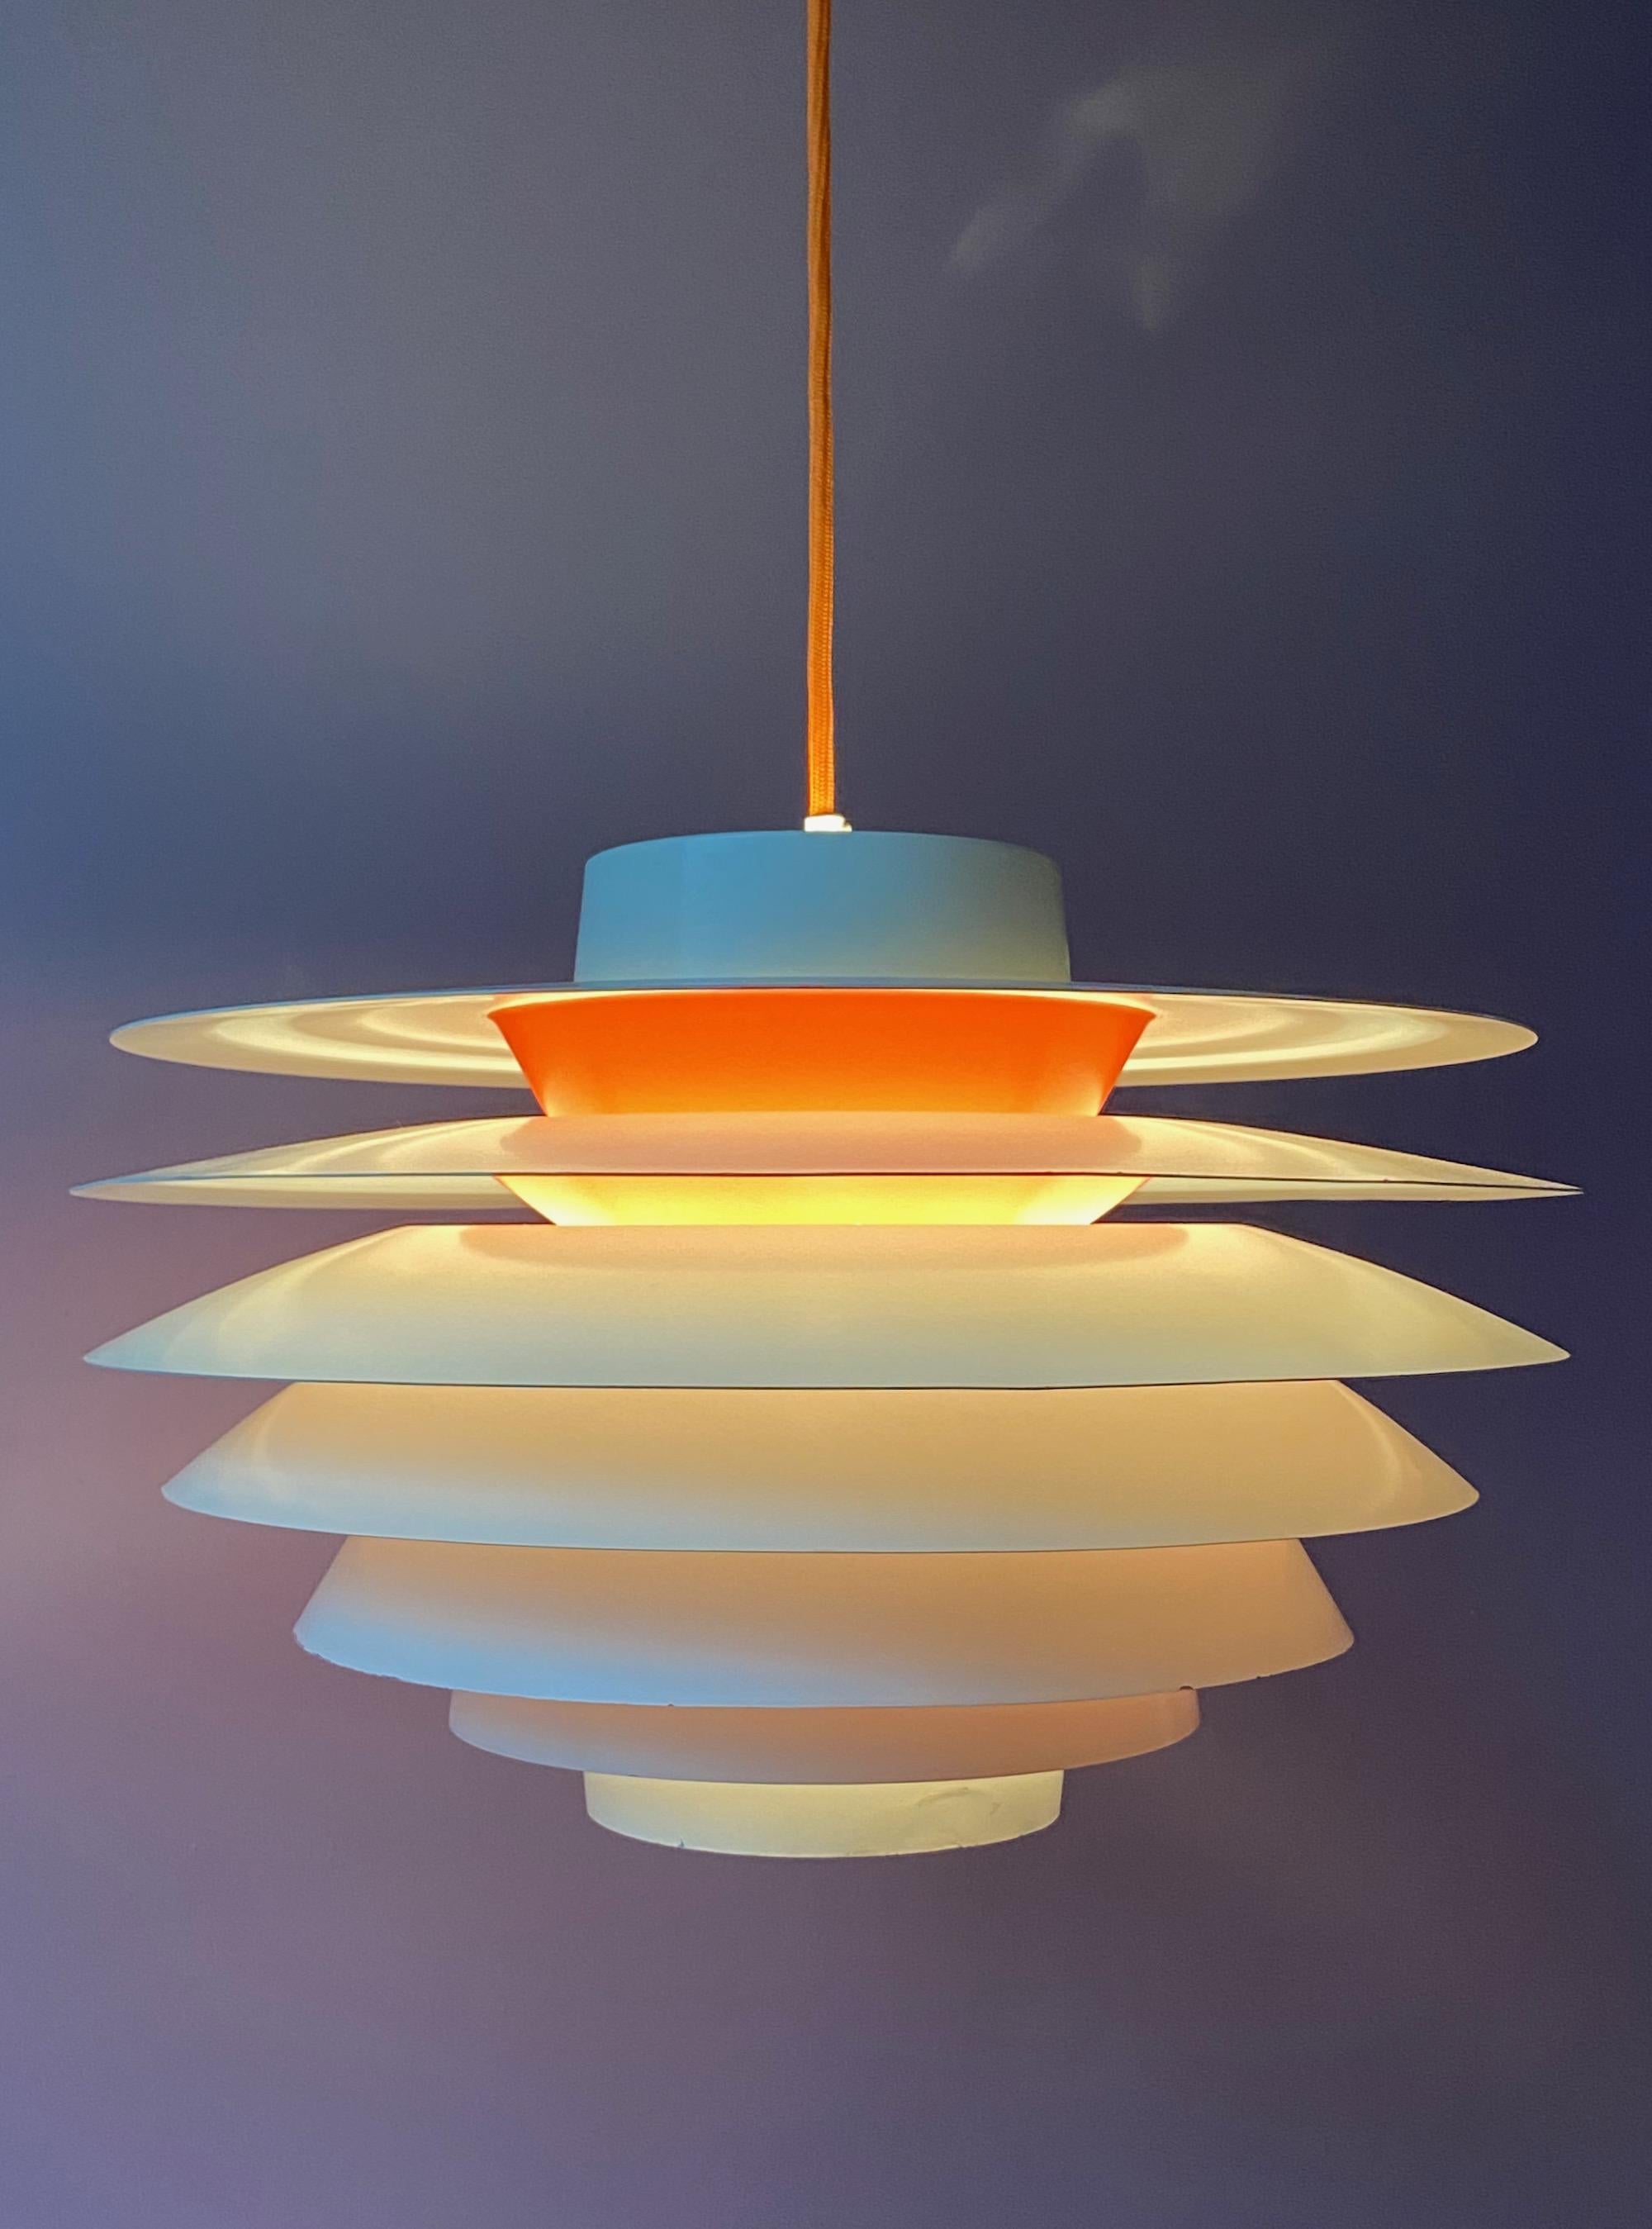 Beautiful large multicolored (white, orange, grey) vintage Sven Middelboe Verona pendant light produced by Nordisk Solar, Denmark. Good and full working condition, rewired with orange fabric cable cord and with E26/27 Edison porcelain socket. Ready